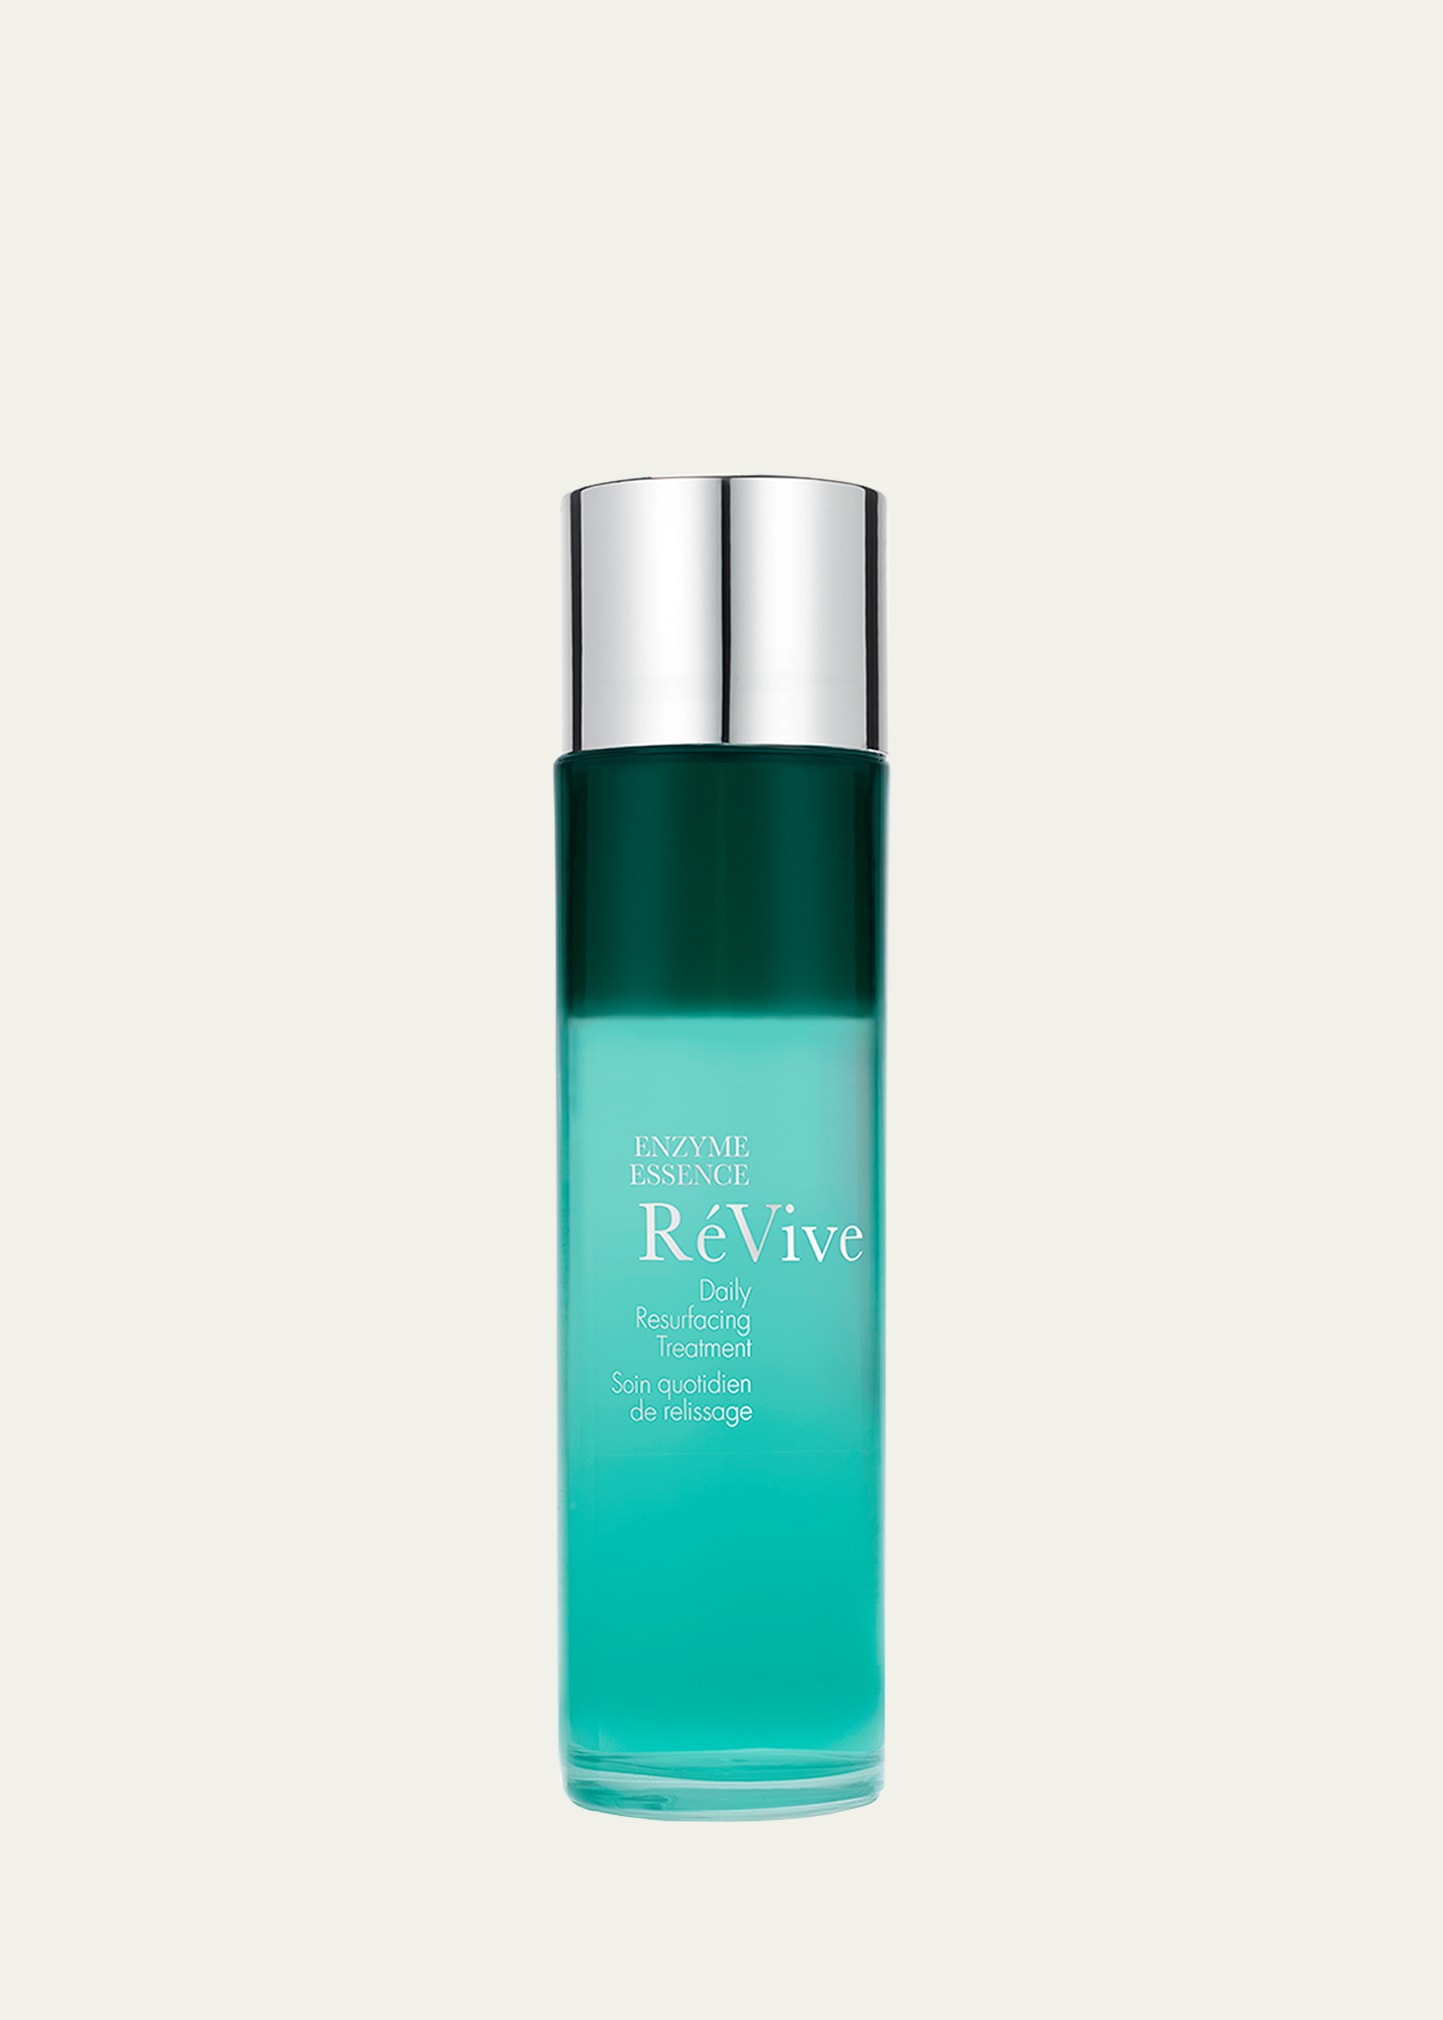 Enzyme Essence Daily Resurfacing Treatment